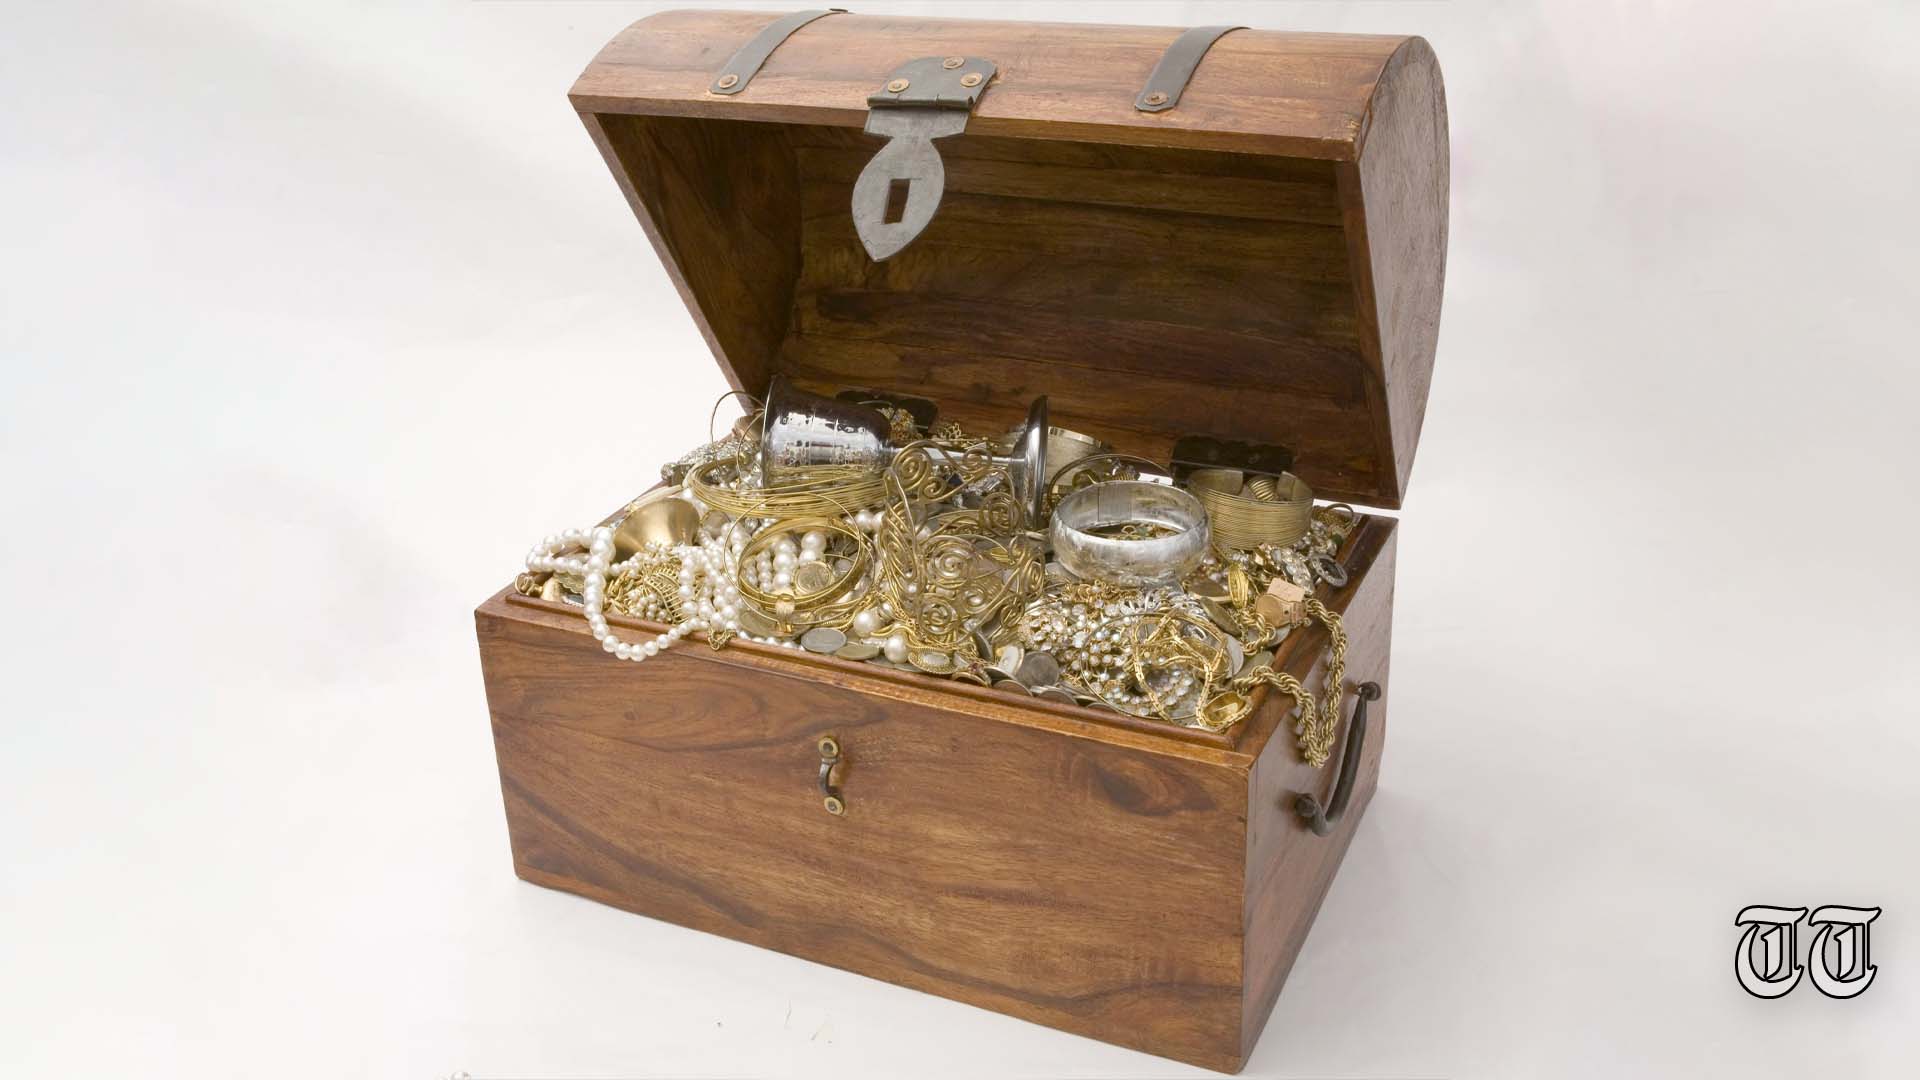 A file photo of a treasure chest is shown.